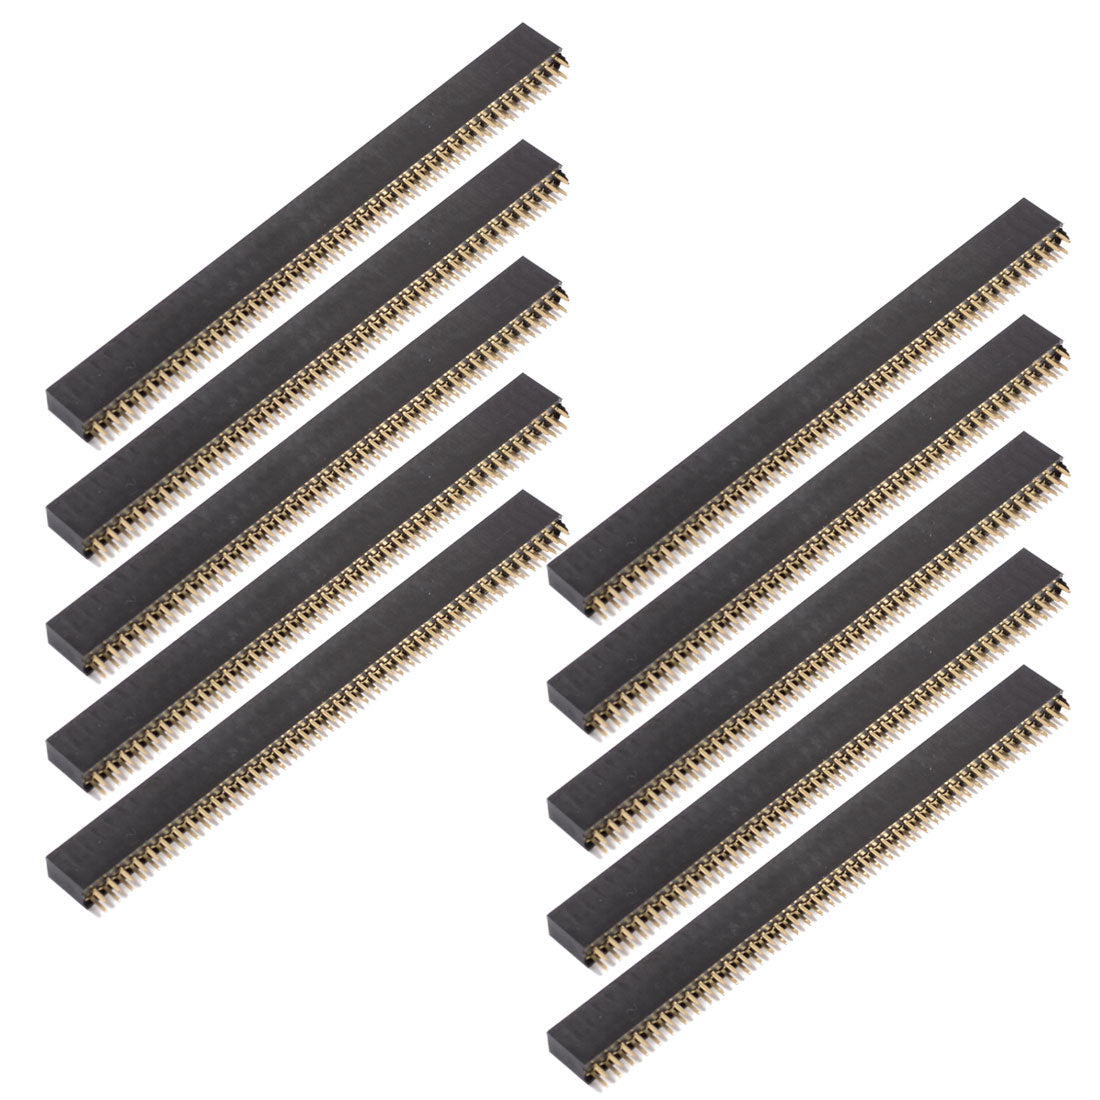 uxcell Uxcell 10 Pcs 2x40 Pin 2.54mm Pitch Double Rows PCB Pin Socket Headers